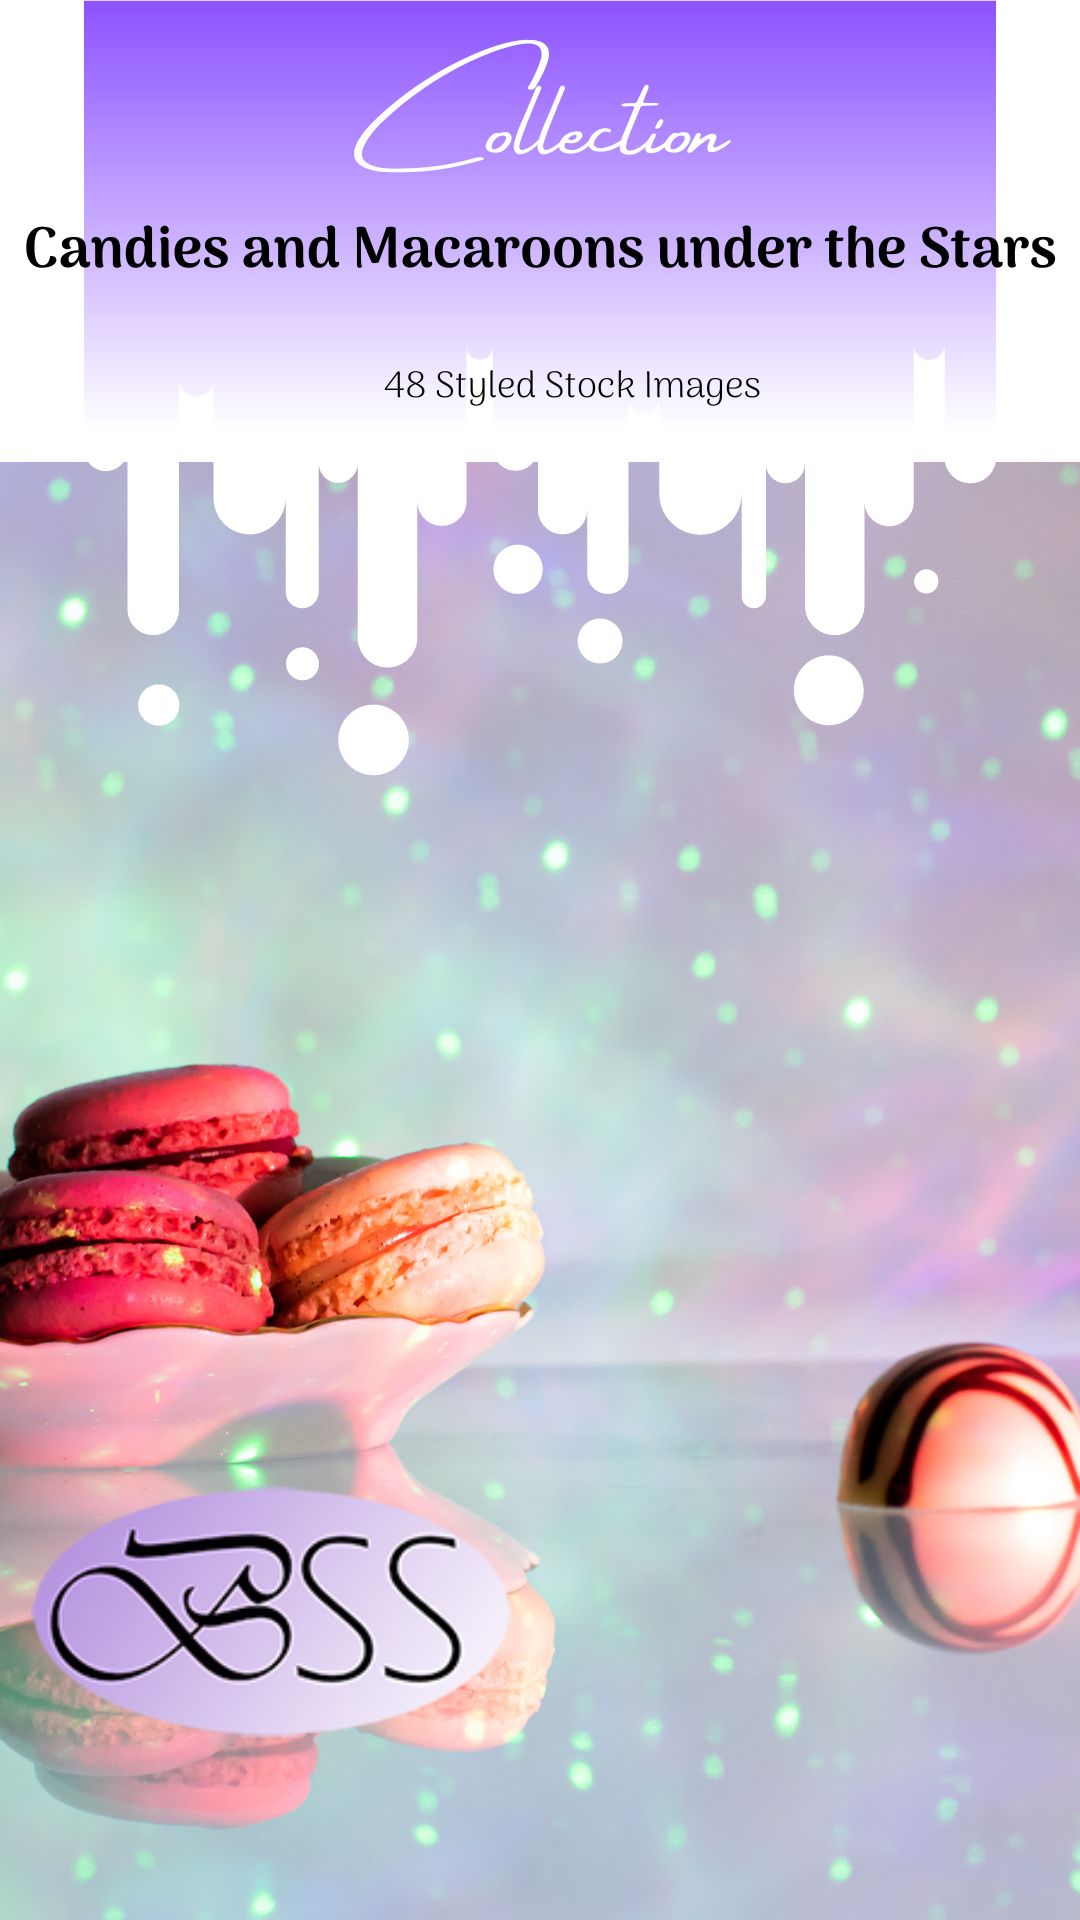 Candies and Macaroons under the Stars Collection